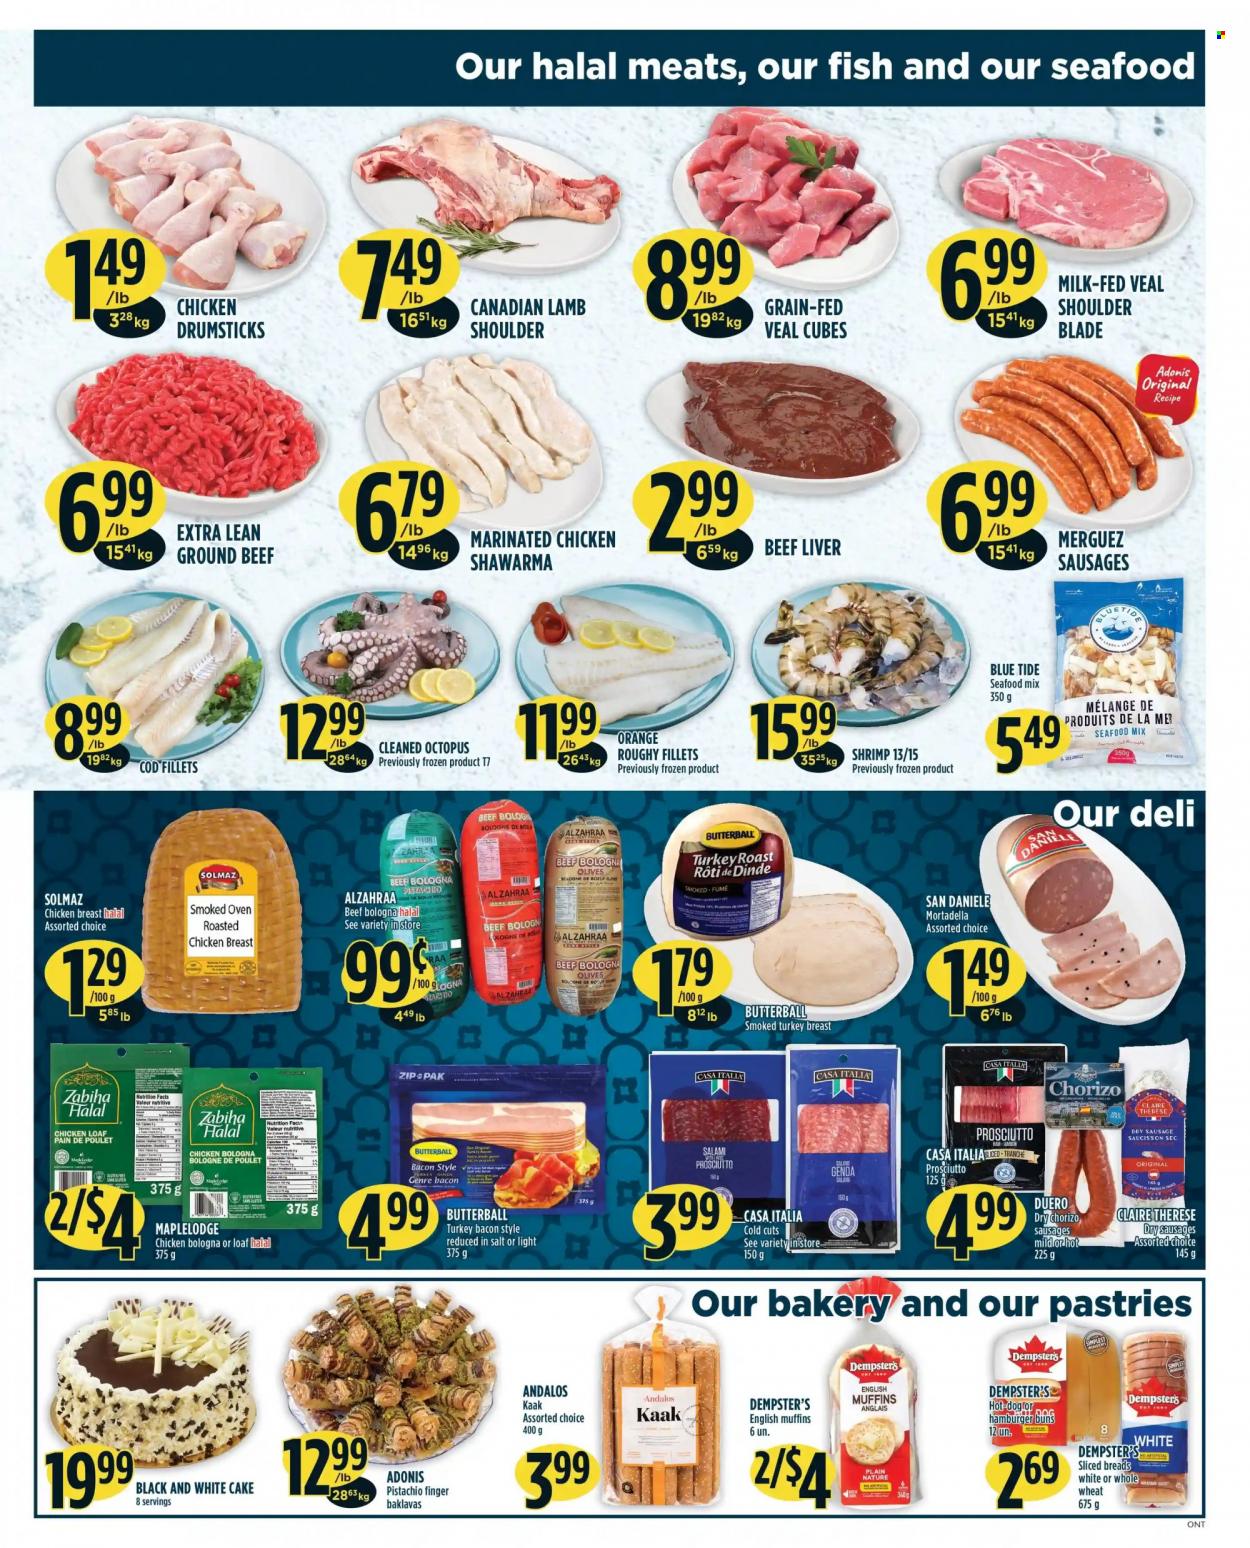 thumbnail - Adonis Flyer - December 30, 2021 - January 05, 2022 - Sales products - english muffins, cake, buns, burger buns, cod, octopus, seafood, shrimps, bacon, Butterball, mortadella, salami, turkey bacon, prosciutto, bologna sausage, sausage, milk, salt, chicken breasts, chicken drumsticks, chicken, turkey, marinated chicken, beef liver, beef meat, ground beef, lamb meat, lamb shoulder, Tide, olives, chorizo, oranges. Page 3.